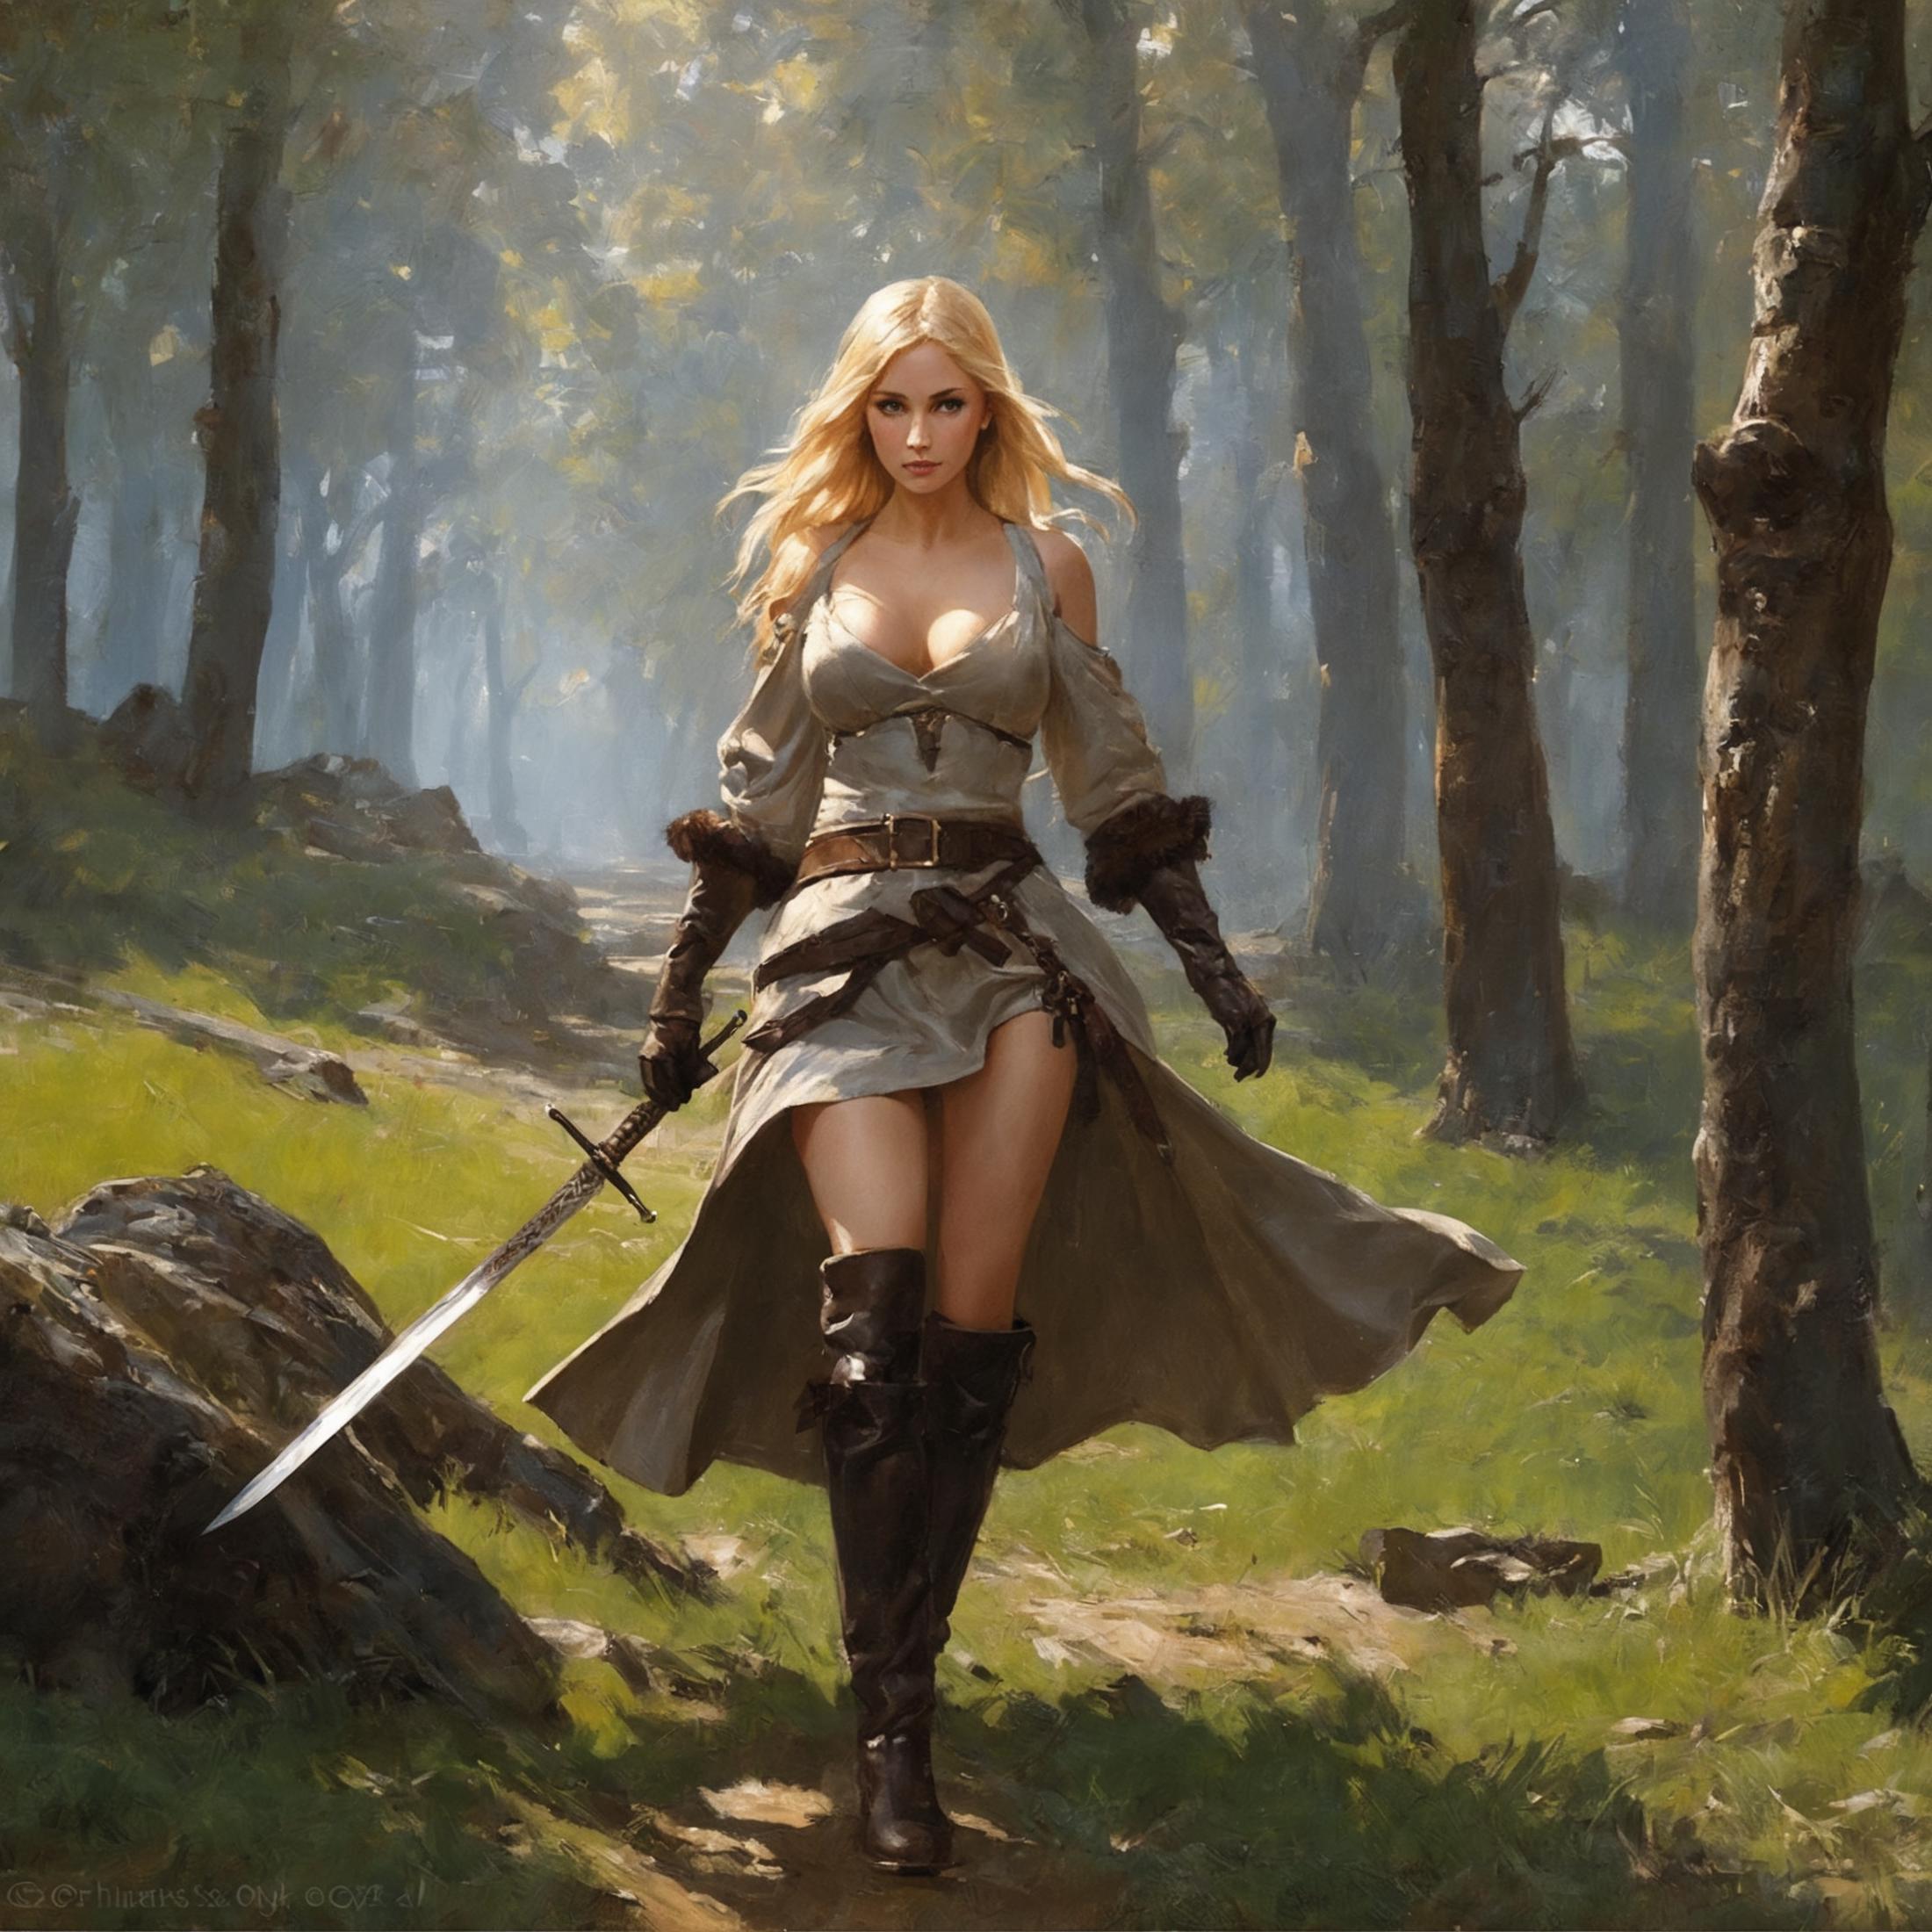 A woman holding a sword while walking through a wooded area.